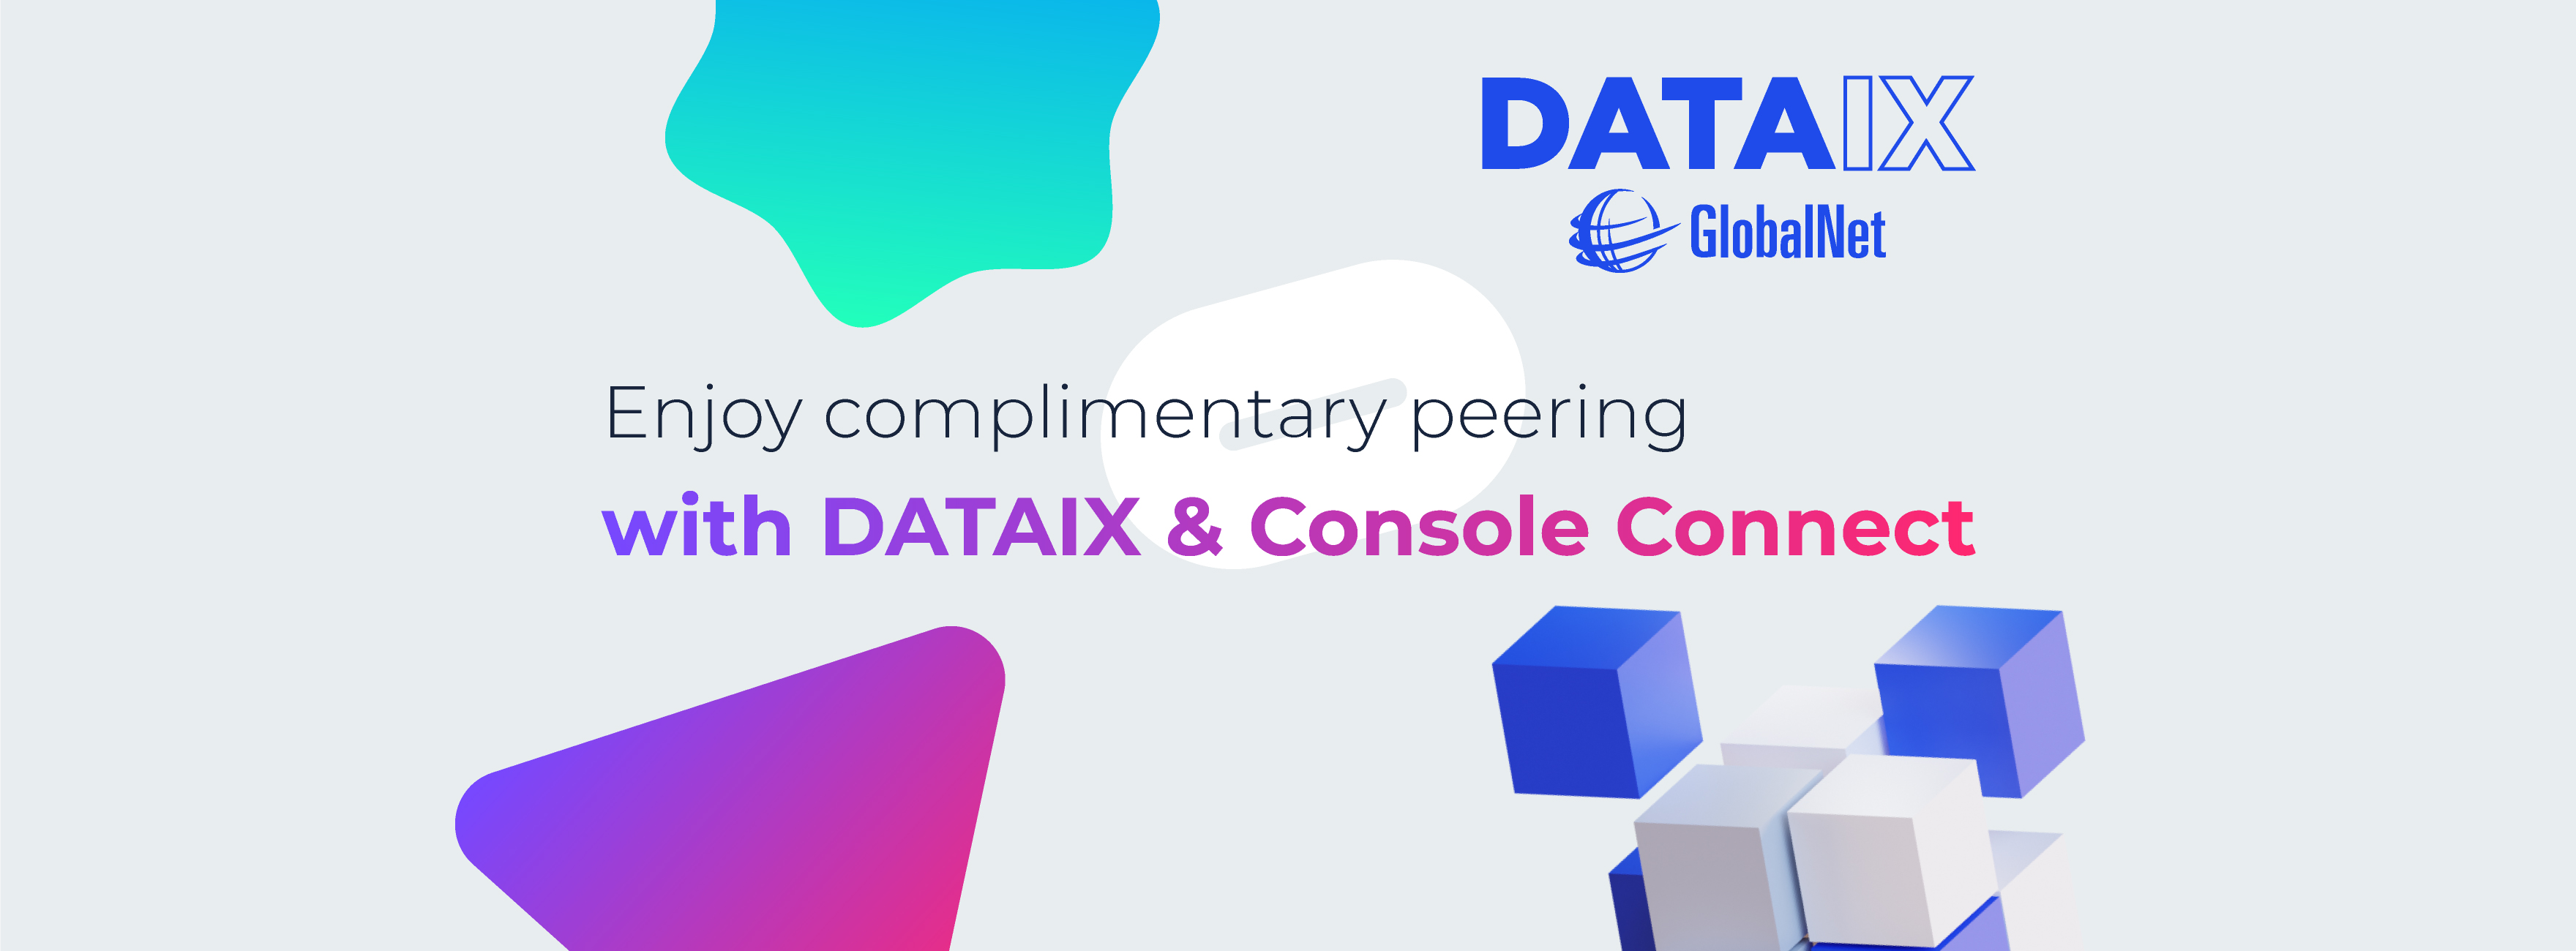 Enjoy free peering with DATAIX & Console Connect